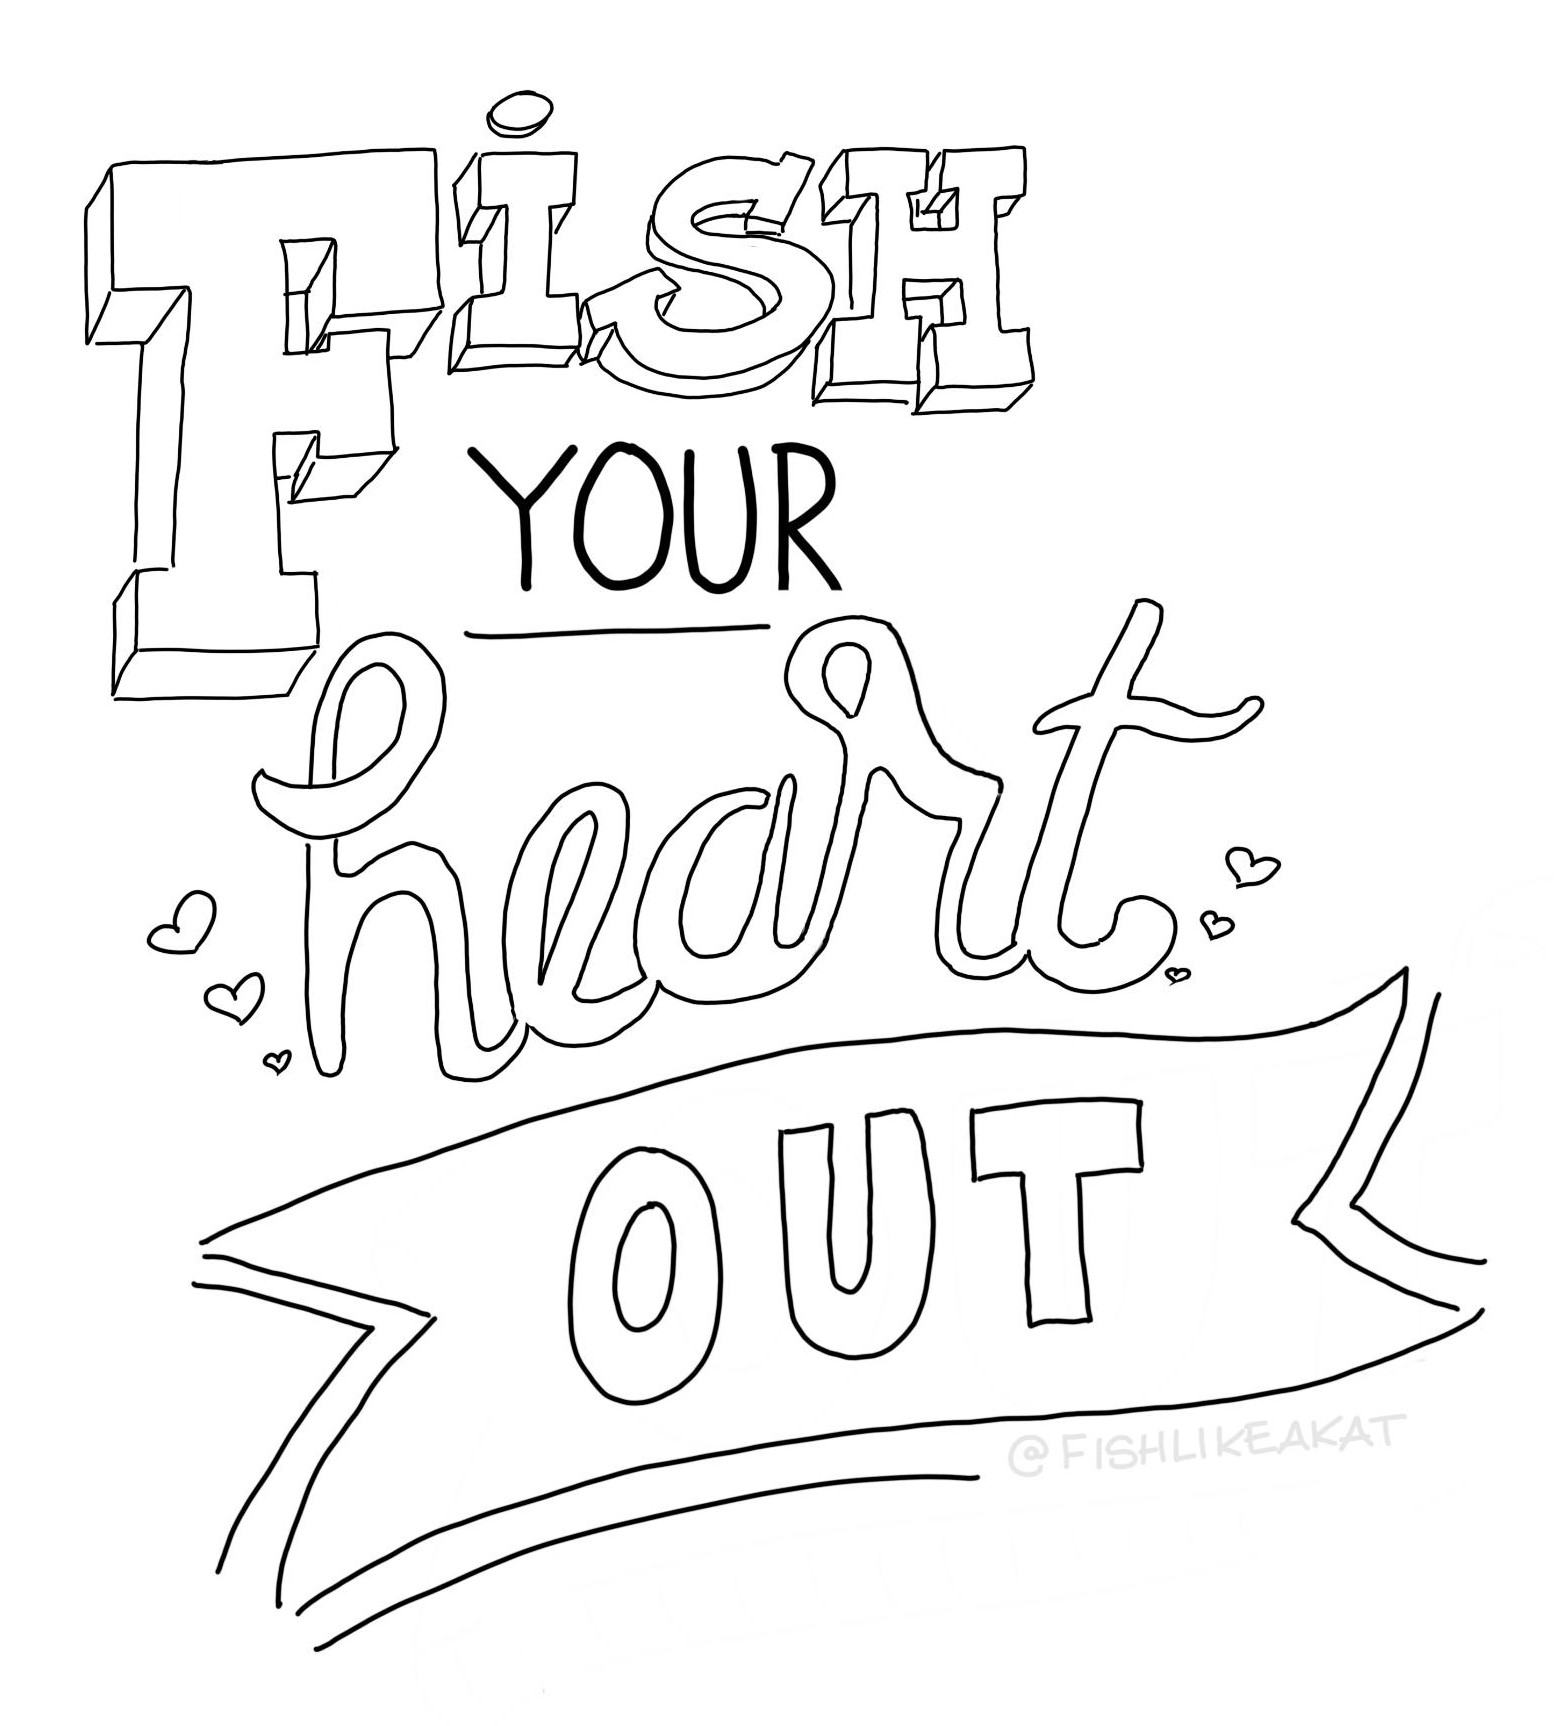 Coloring page with text: Fish your heart out